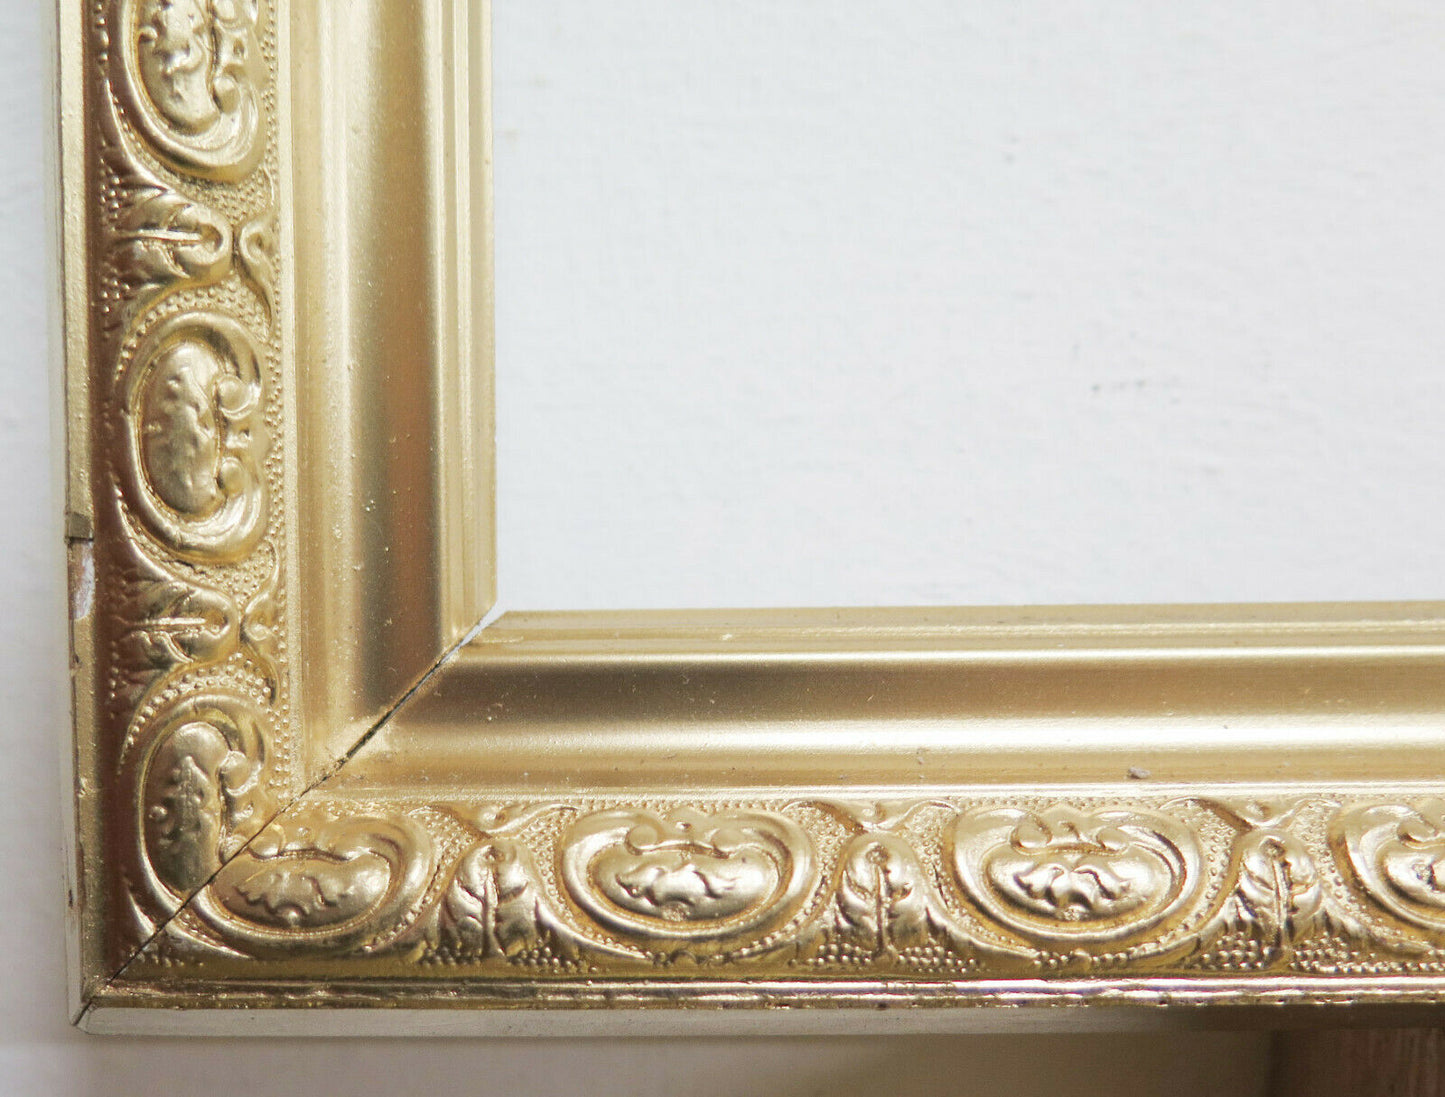 GOLDEN FRAME 37x47 IN BAROQUE STYLE BAROQUE STYLE GILDED WOOD FRAME R112 